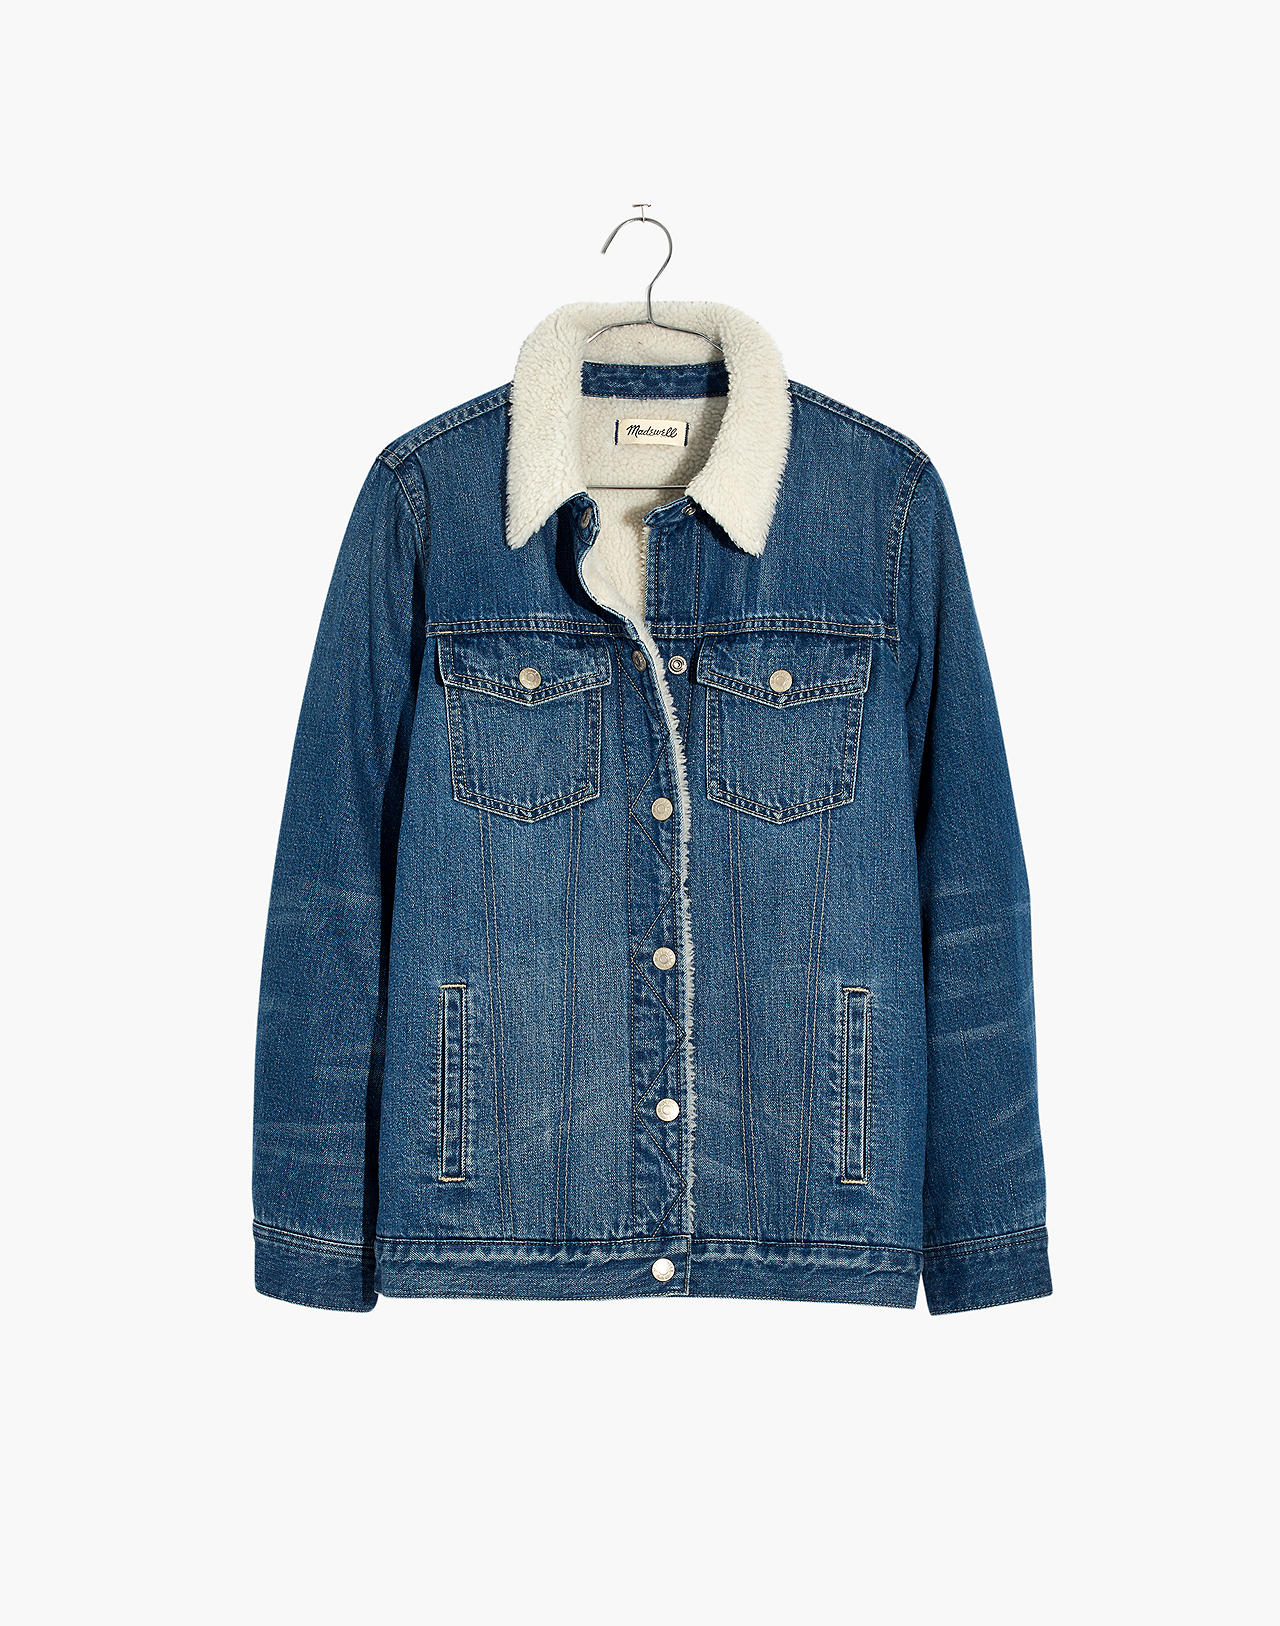 The Oversized Jean Jacket in Pinehill Wash: Sherpa Edition